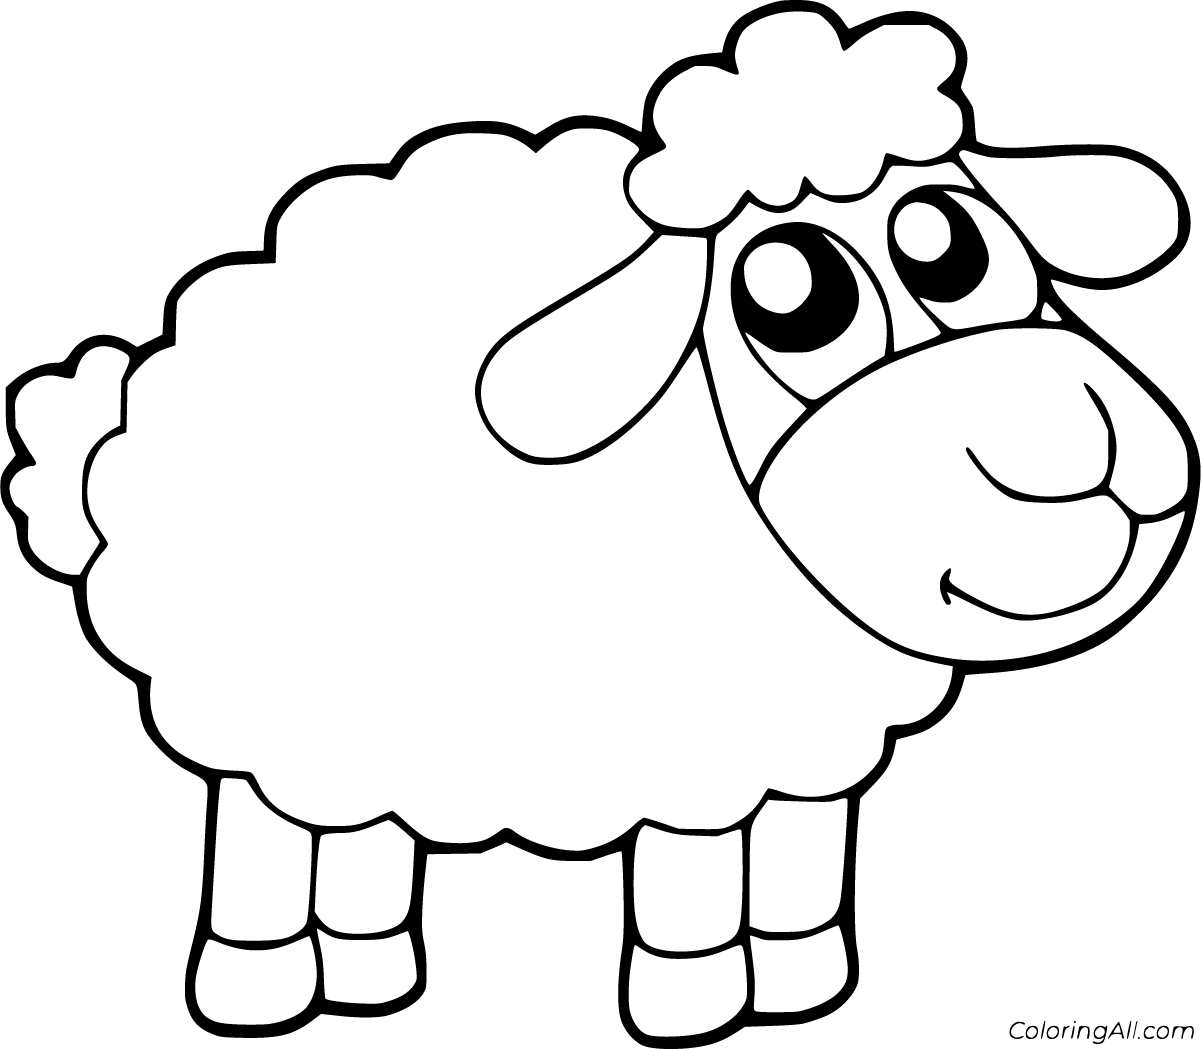 Download 329+ Sheep Coloring Pages PNG PDF File - All free Mockups